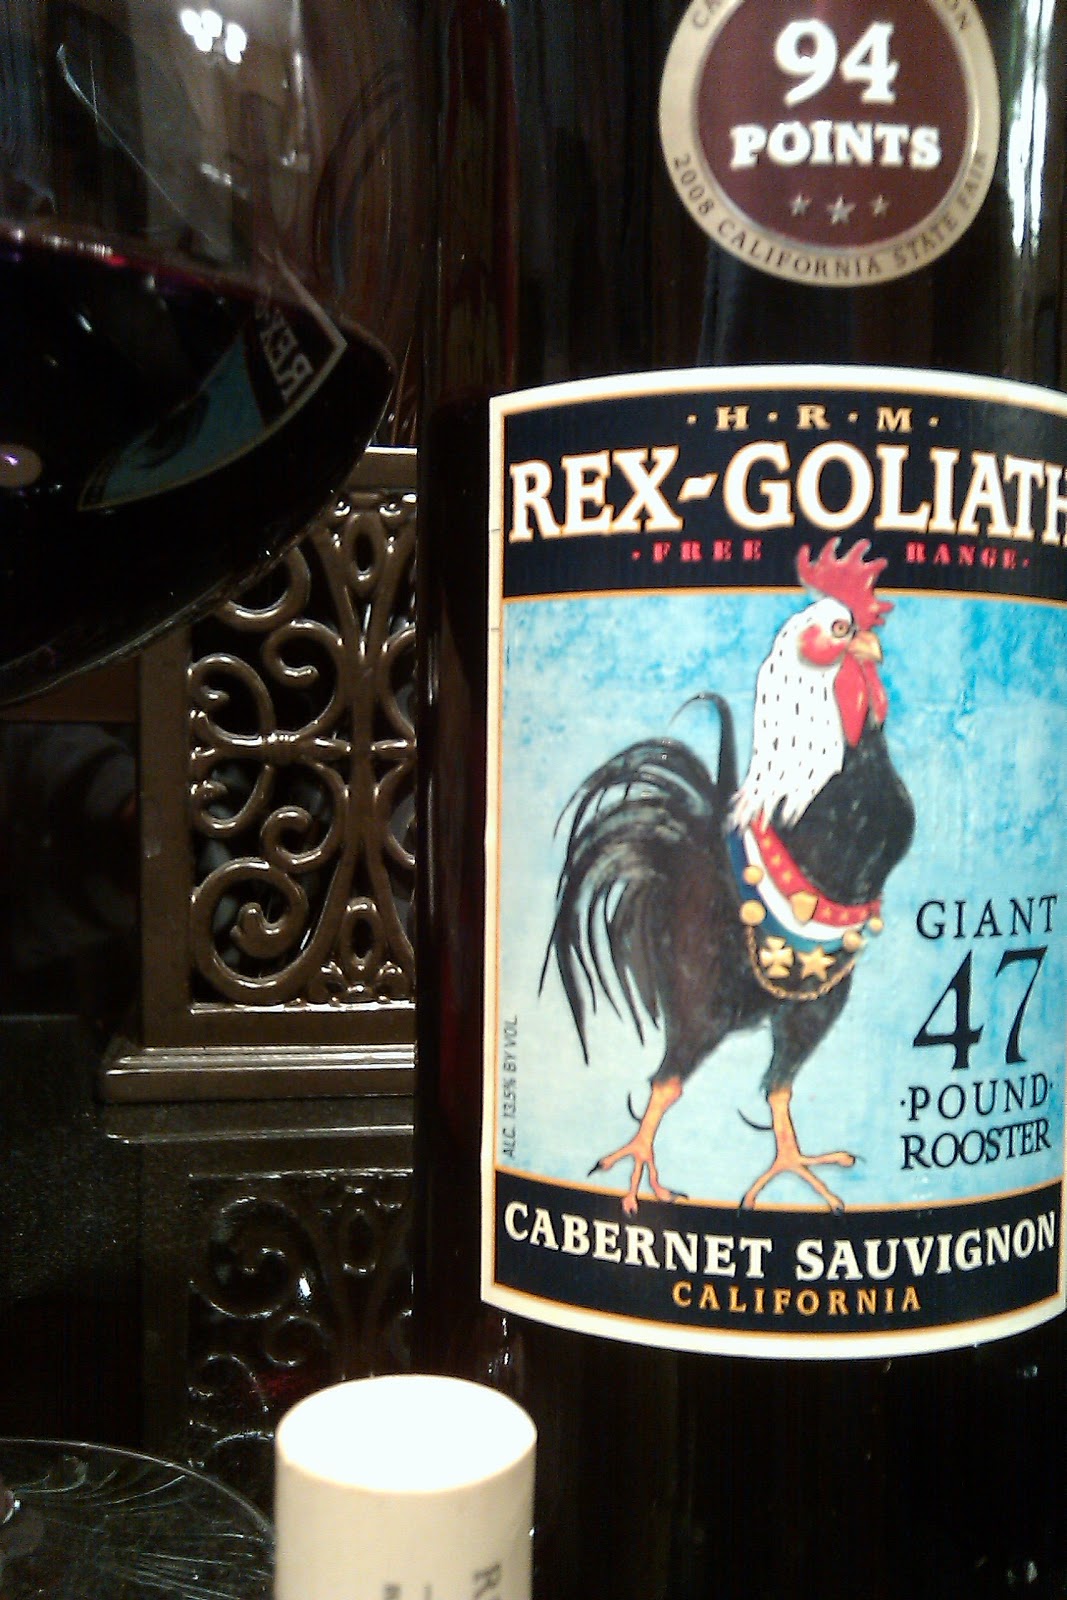 Image result for giant rooster wine